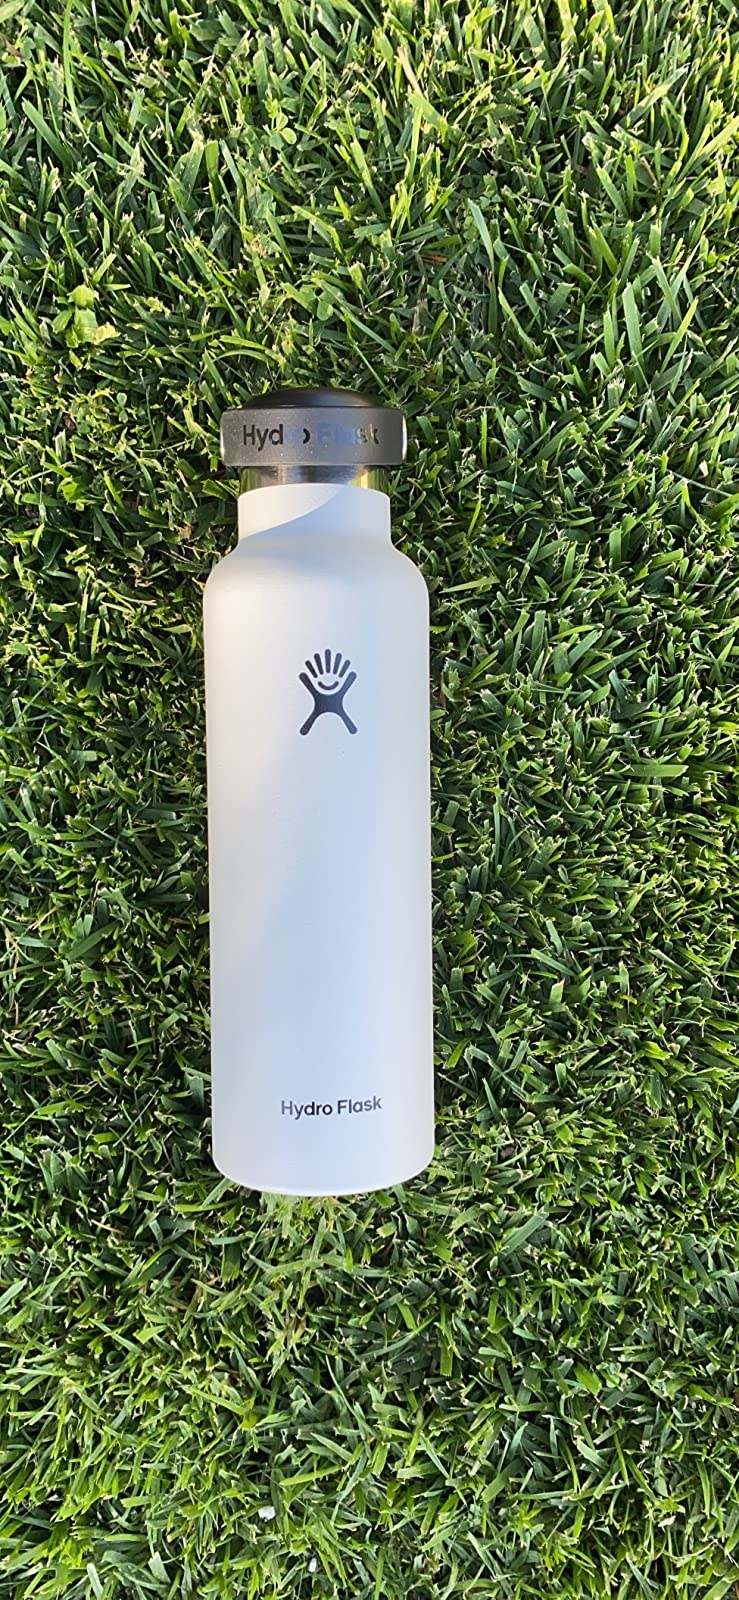 The white hydroflask in grass